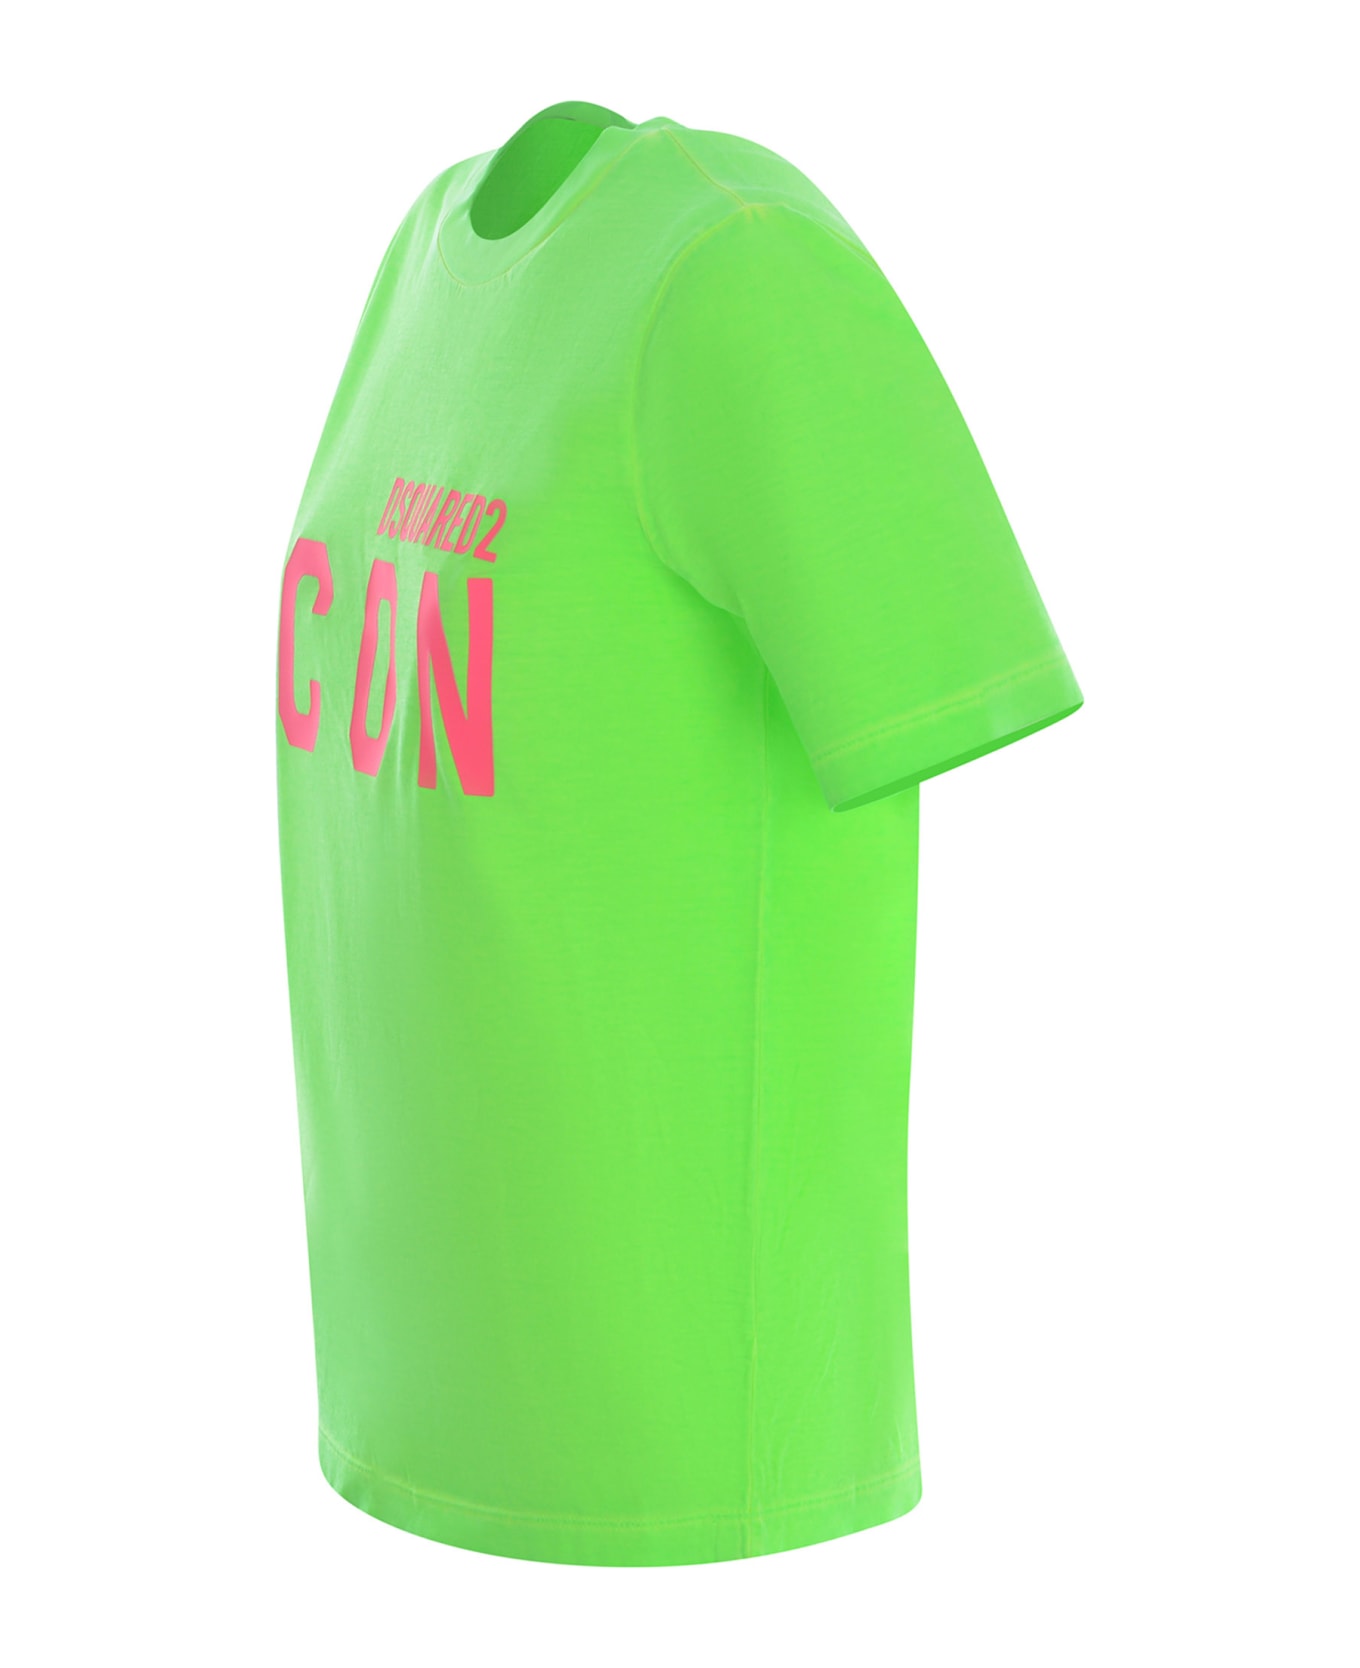 Dsquared2 T-shirt "icon" - Verde fluo